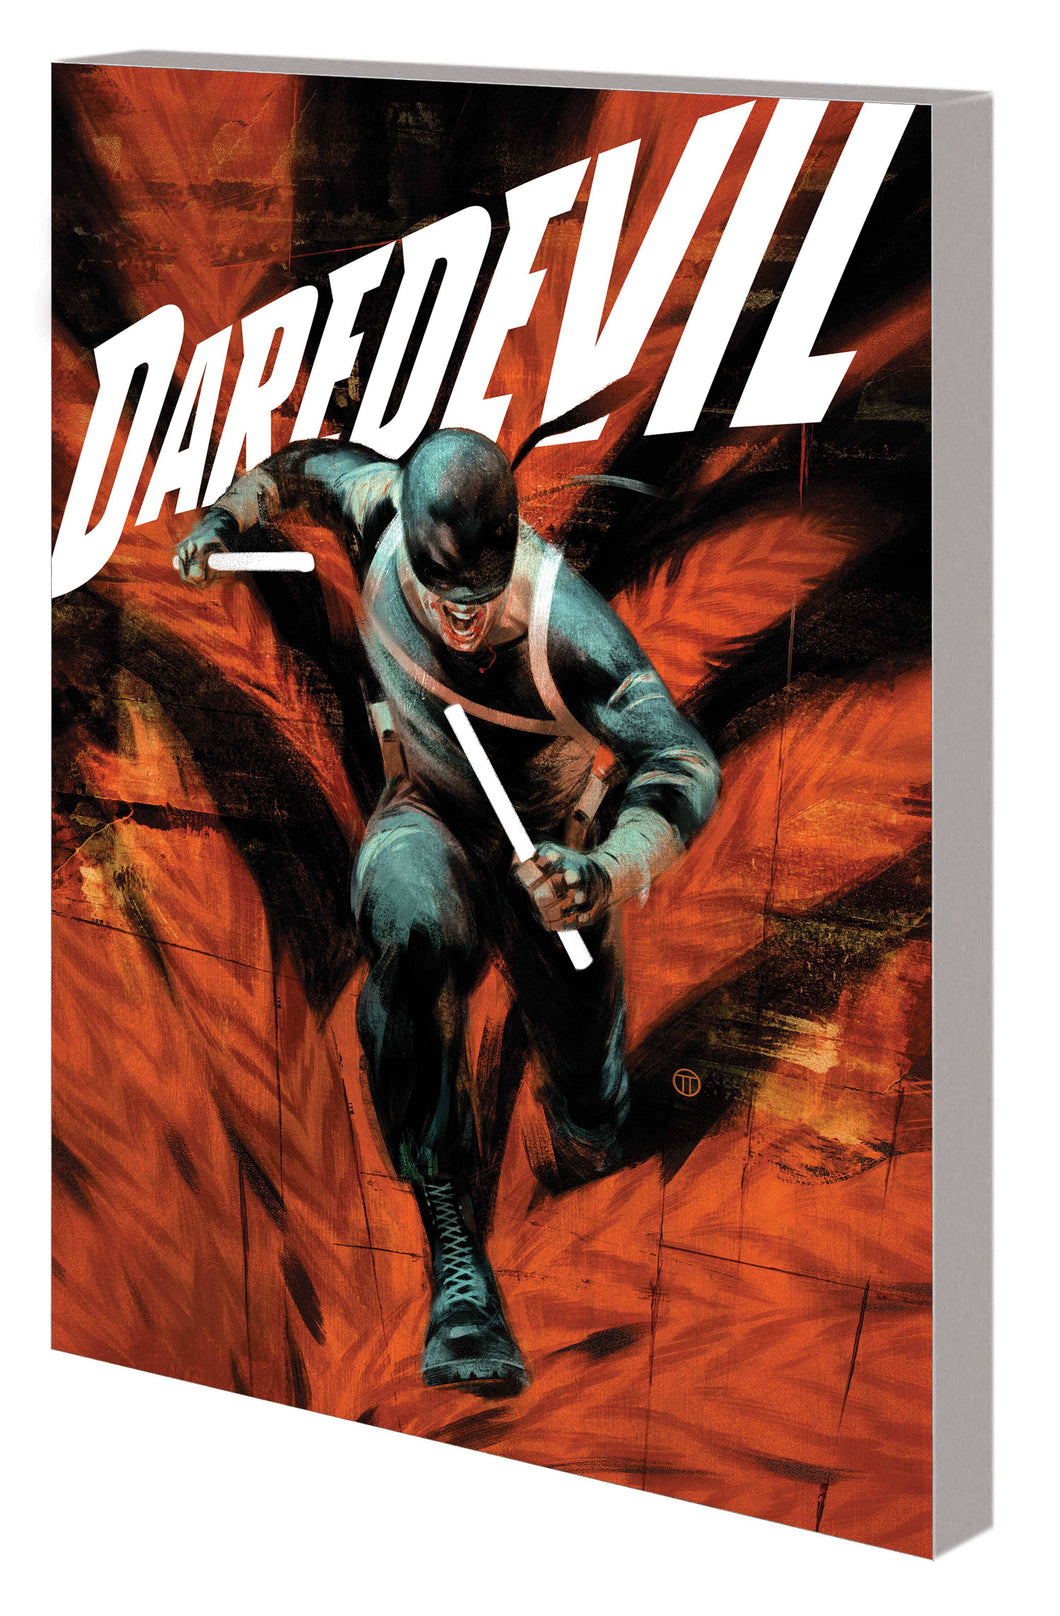 Daredevil By Chip Zdarsky TP Vol 04 End of Hell - Books